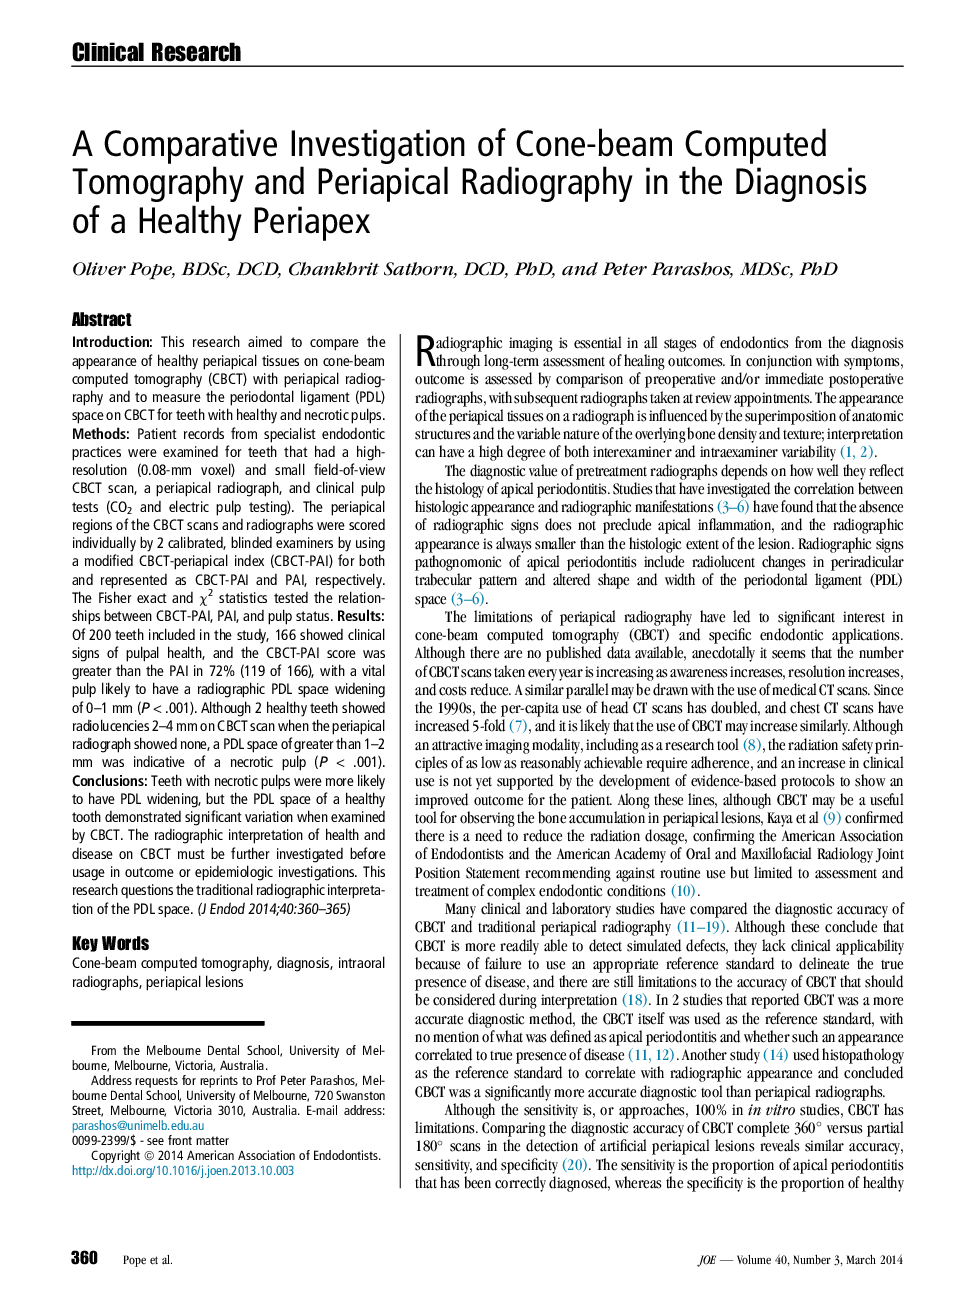 A Comparative Investigation of Cone-beam Computed Tomography and Periapical Radiography in the Diagnosis of a Healthy Periapex